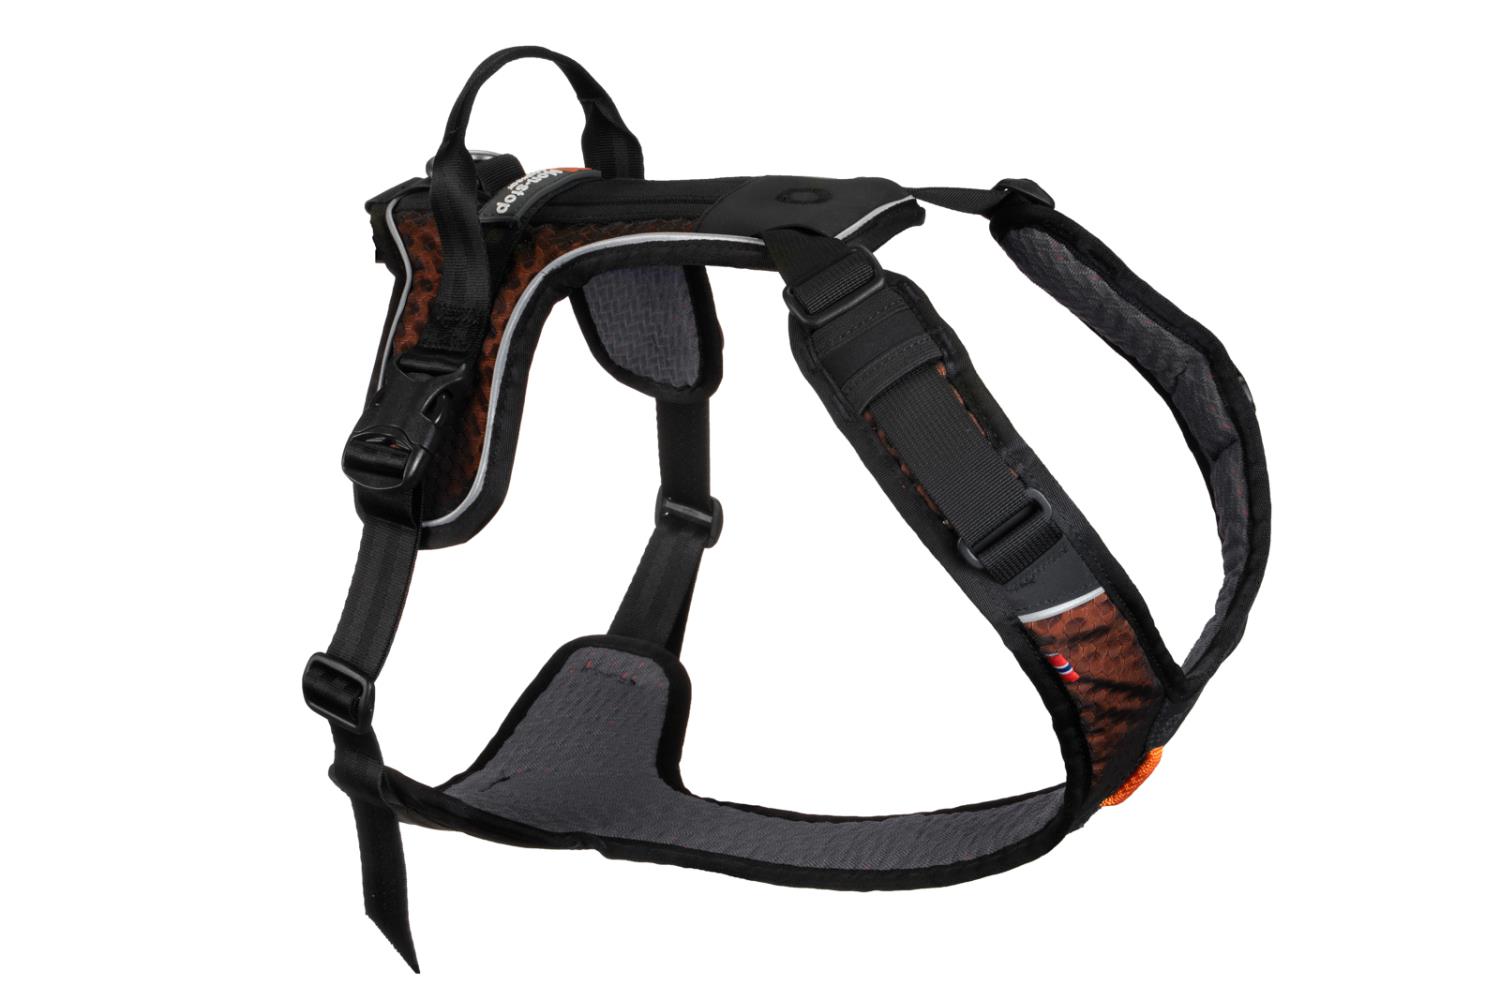 Non-stop Rock harness, XS